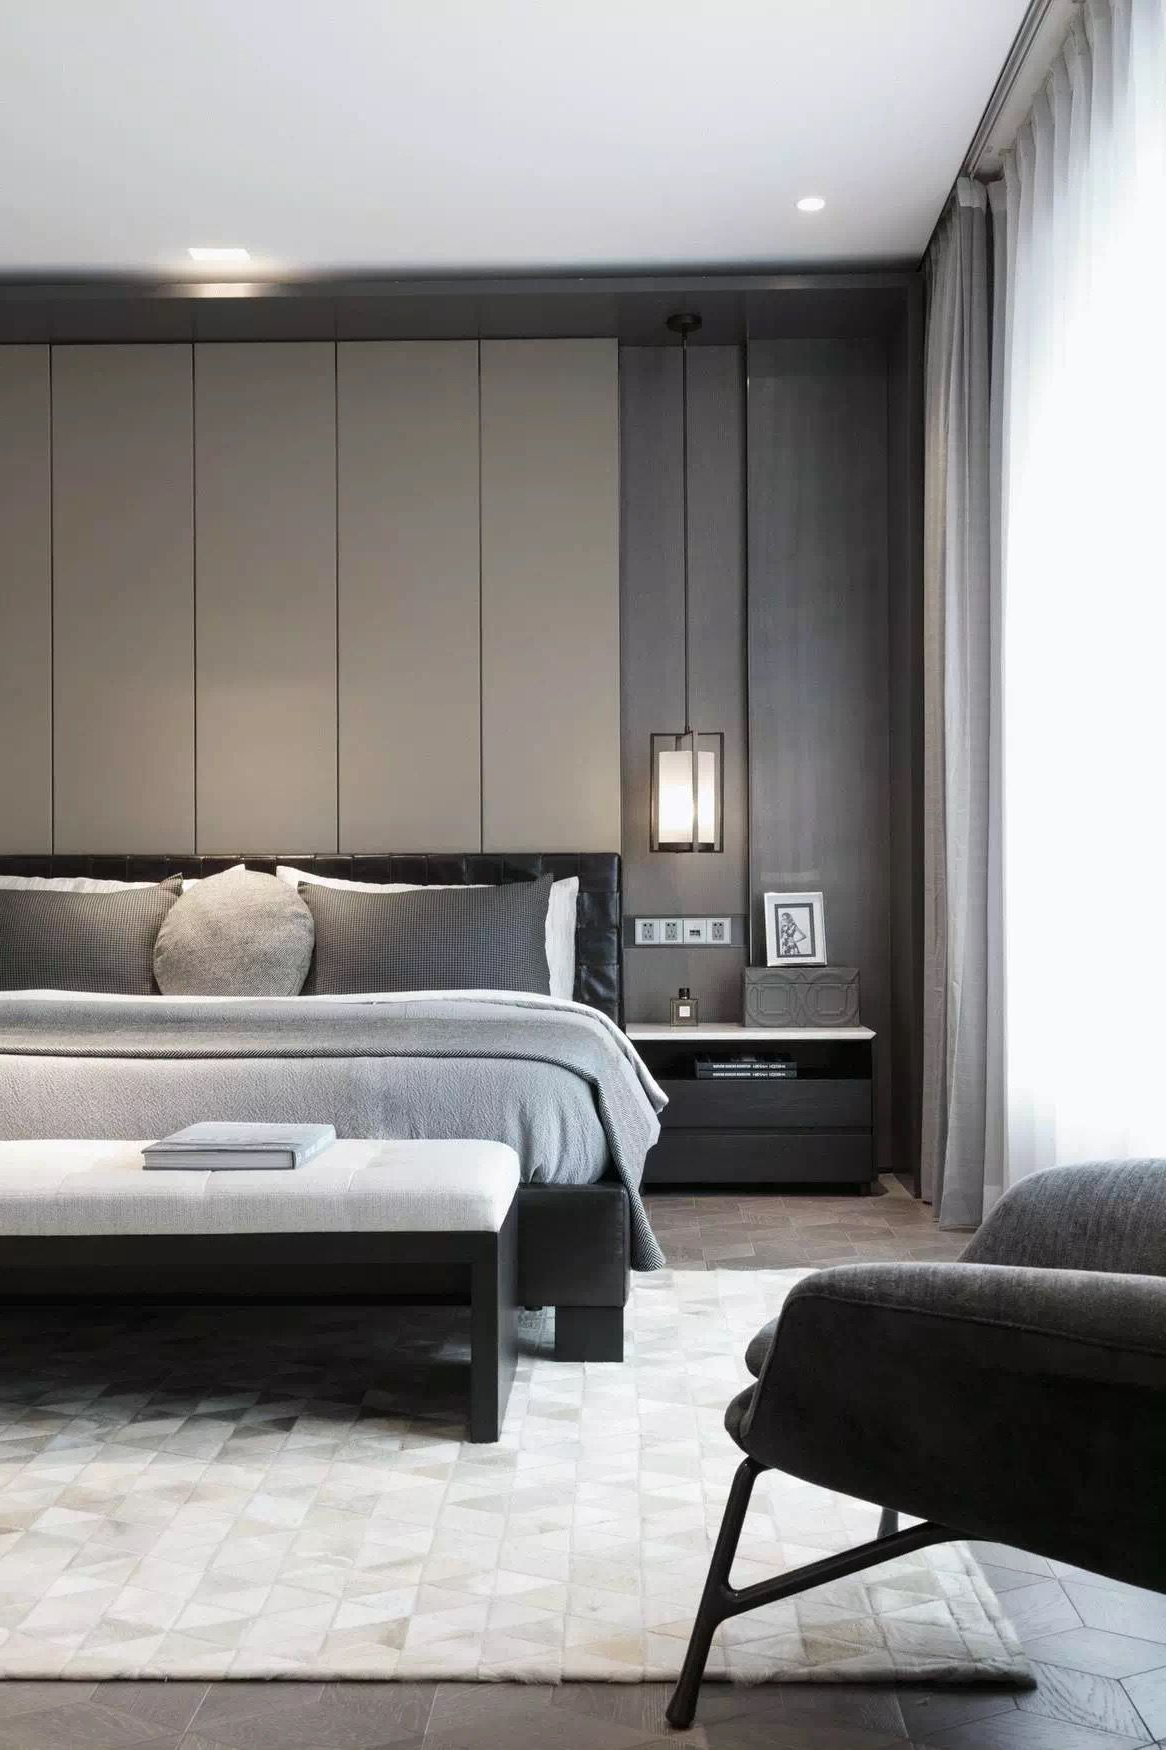 How To Make Your Bedroom More Elegant Visit Us And See